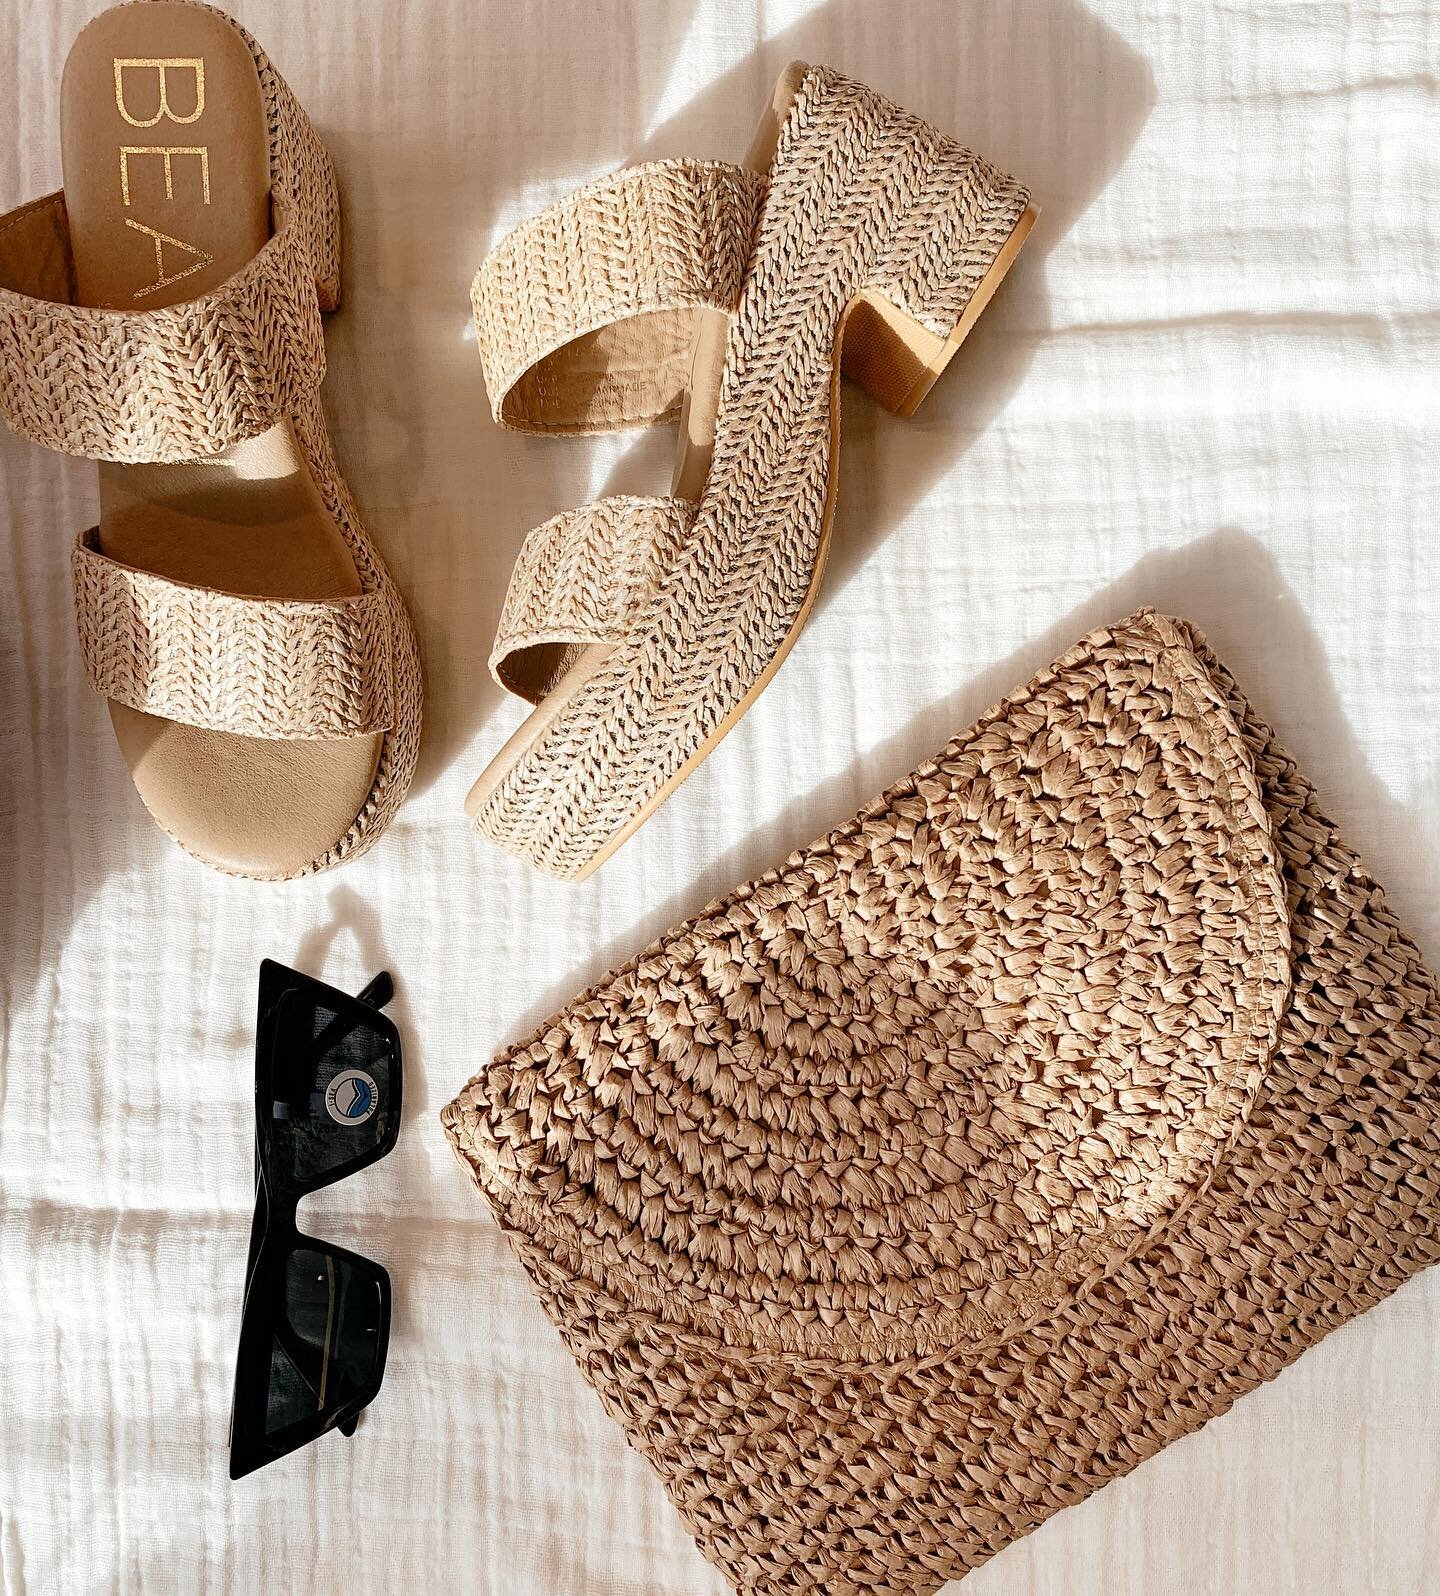 Accessories can MAKE an outfit🤍These Ocean Ave Platform Sandals are perfect for any outfit and occasion this season👡And of course you need the Anita Woven Crossbody to match🤍Then don&rsquo;t forget a pair of sunnies on you at all times🕶️

Shop th